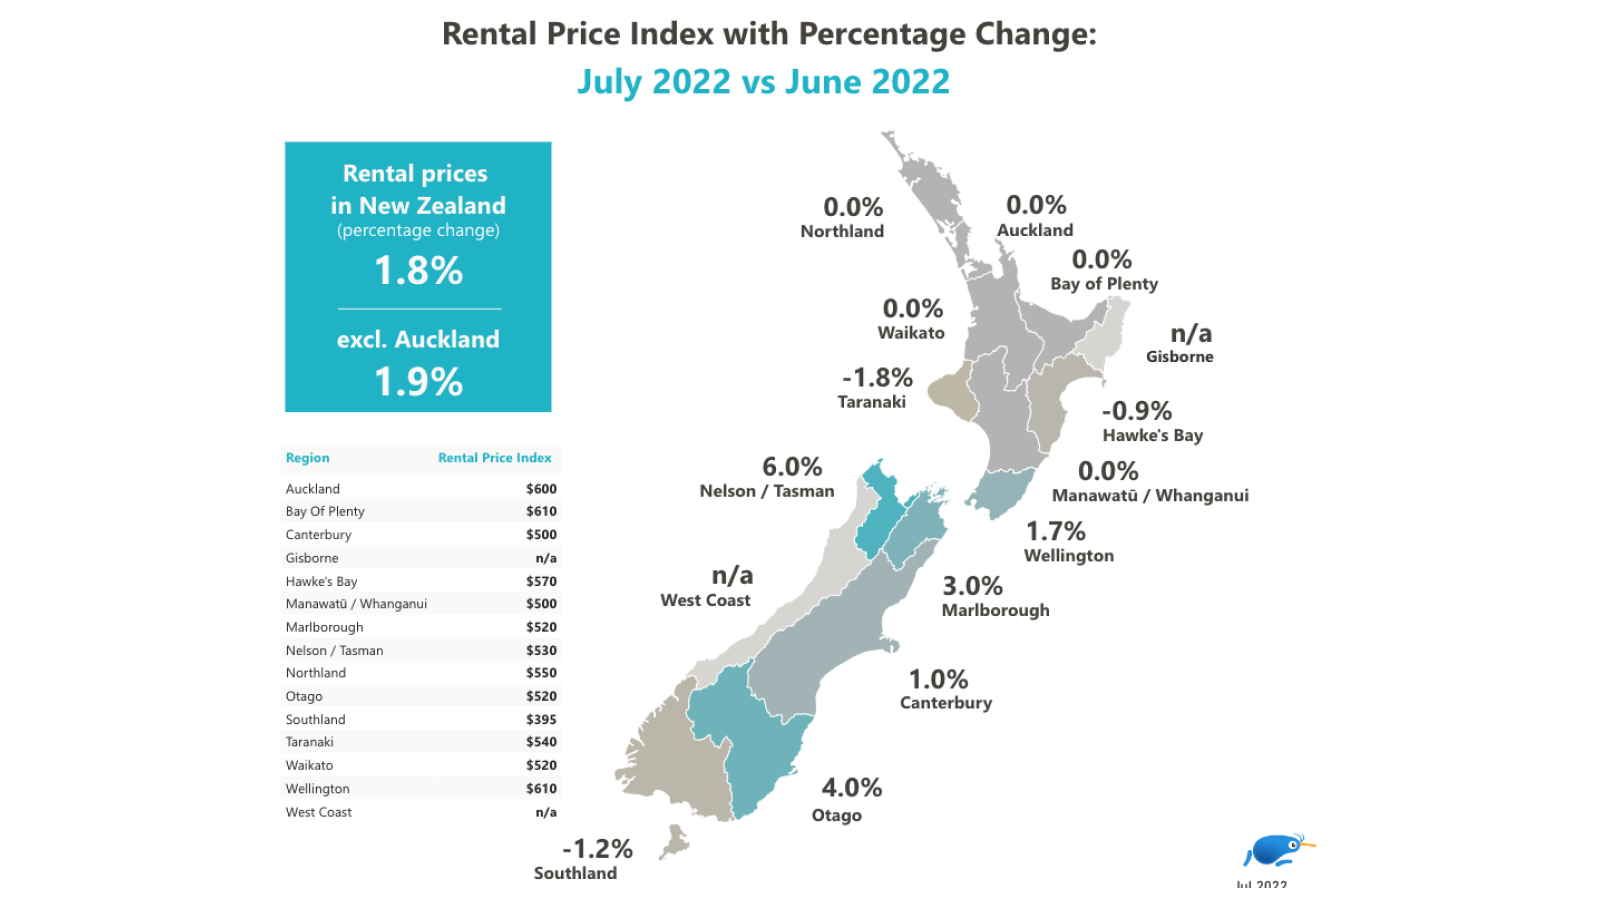 Map of New Zealand highlighting the rental price index with percentage change